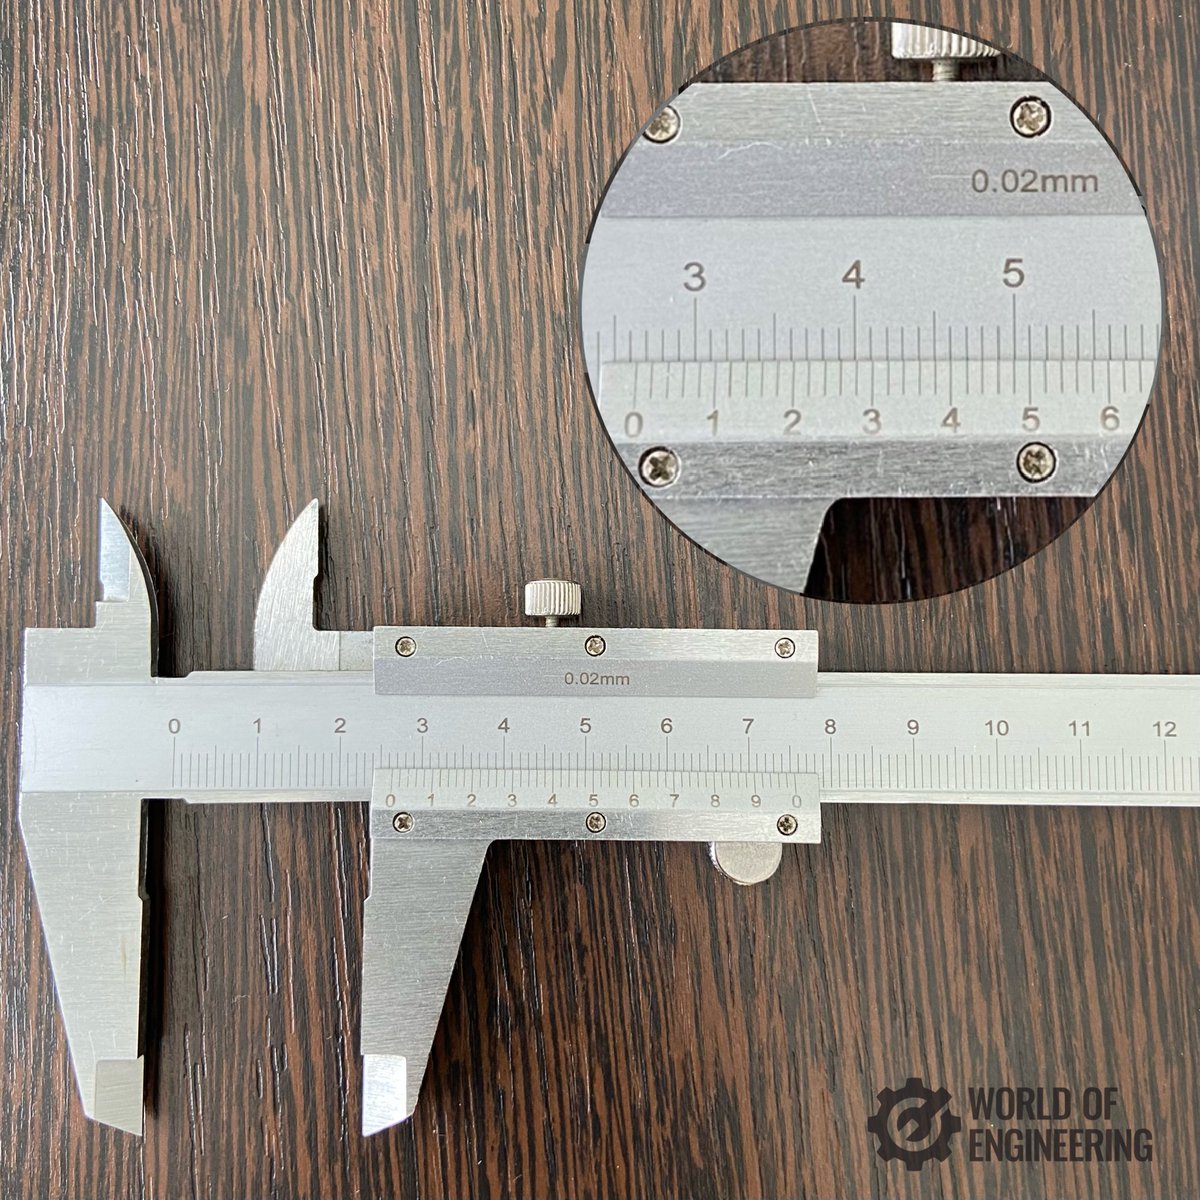 RT @engineers_feed: Read this vernier caliper. https://t.co/PAl9fjEEWq